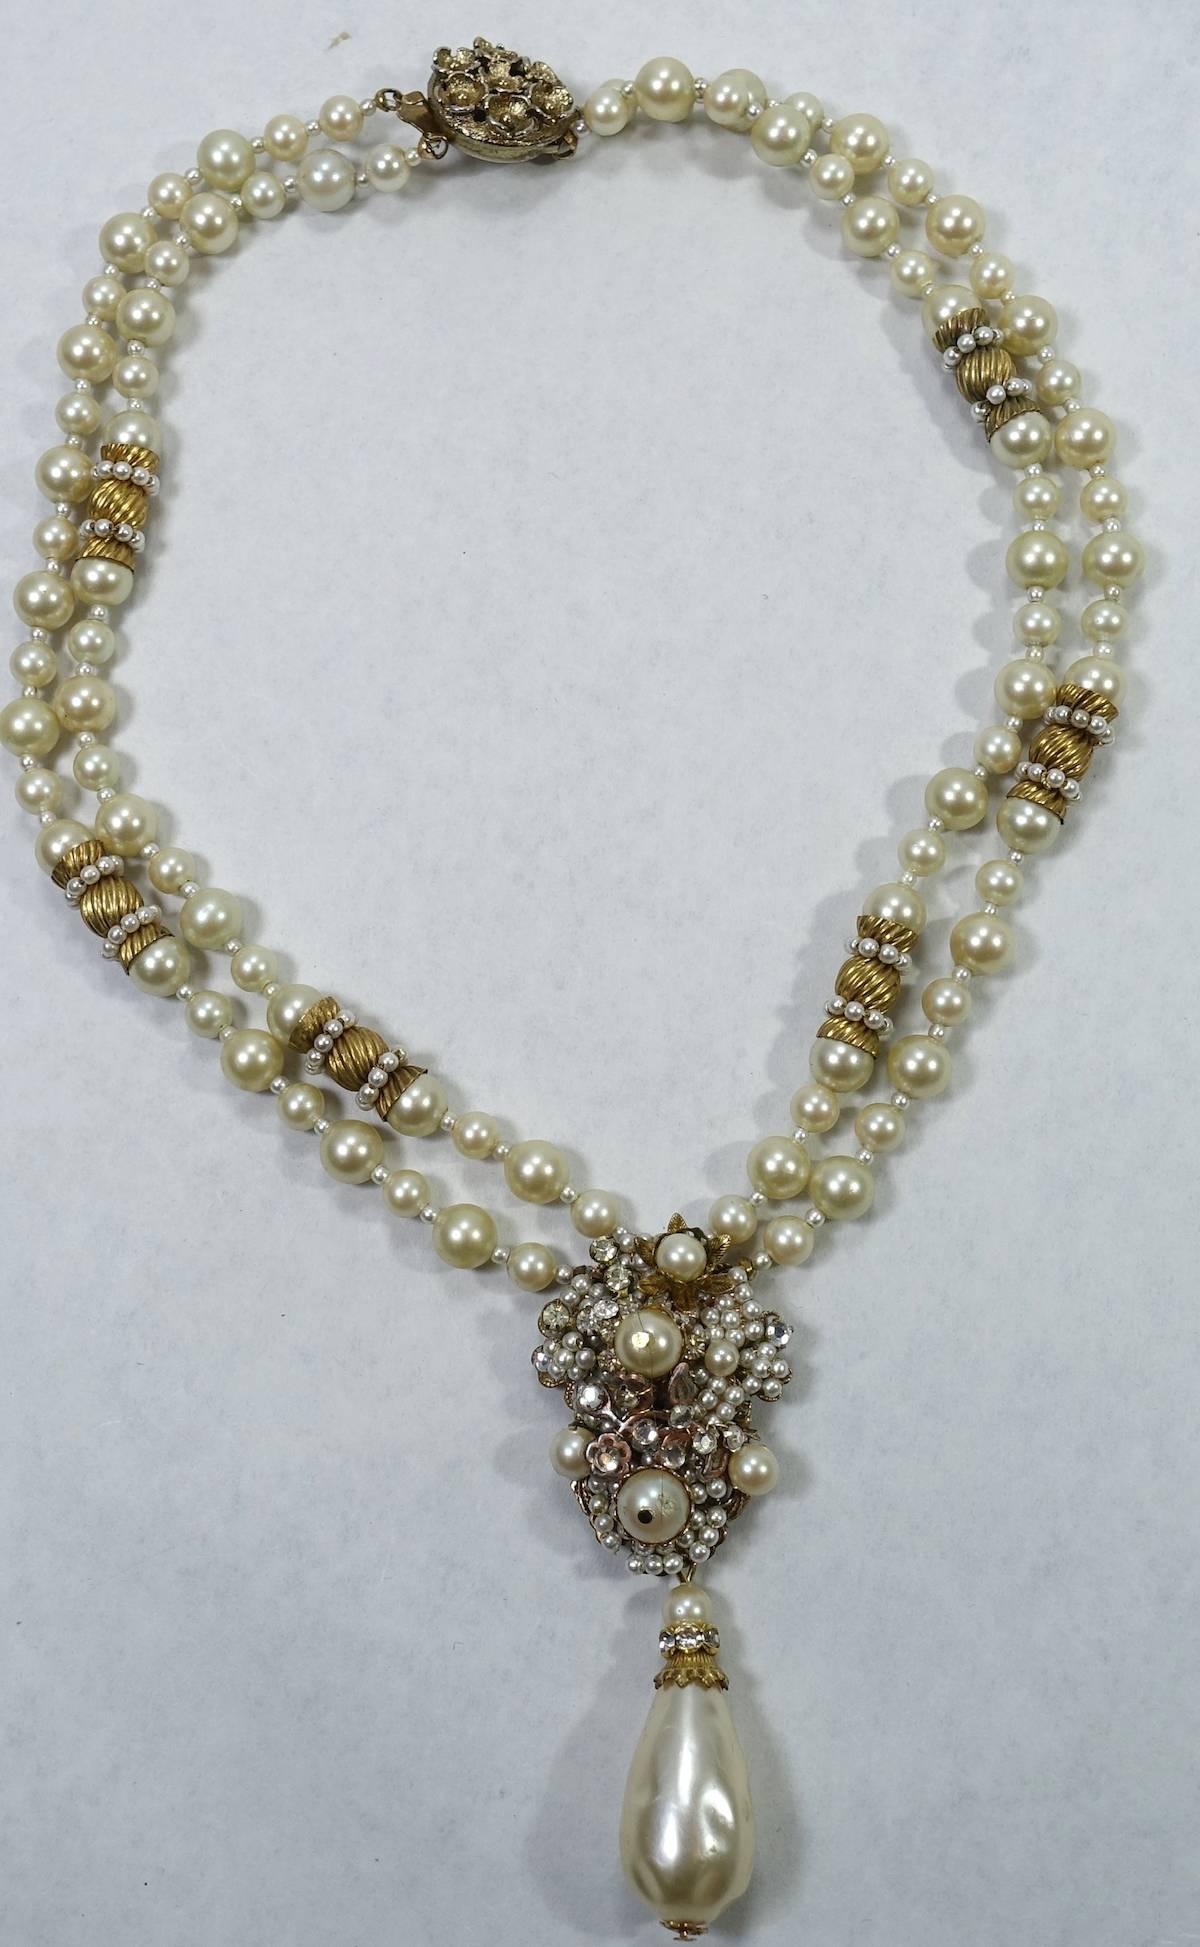 This vintage signed DeMario necklace features faux pearls with rose montee stones in a gold-tone setting.  This necklace measures 17” long x 1/4” wide with a slide in clasp.  The drop is 3-1/4” x 1-1/8” and is signed “DeMario”.  This necklace is in